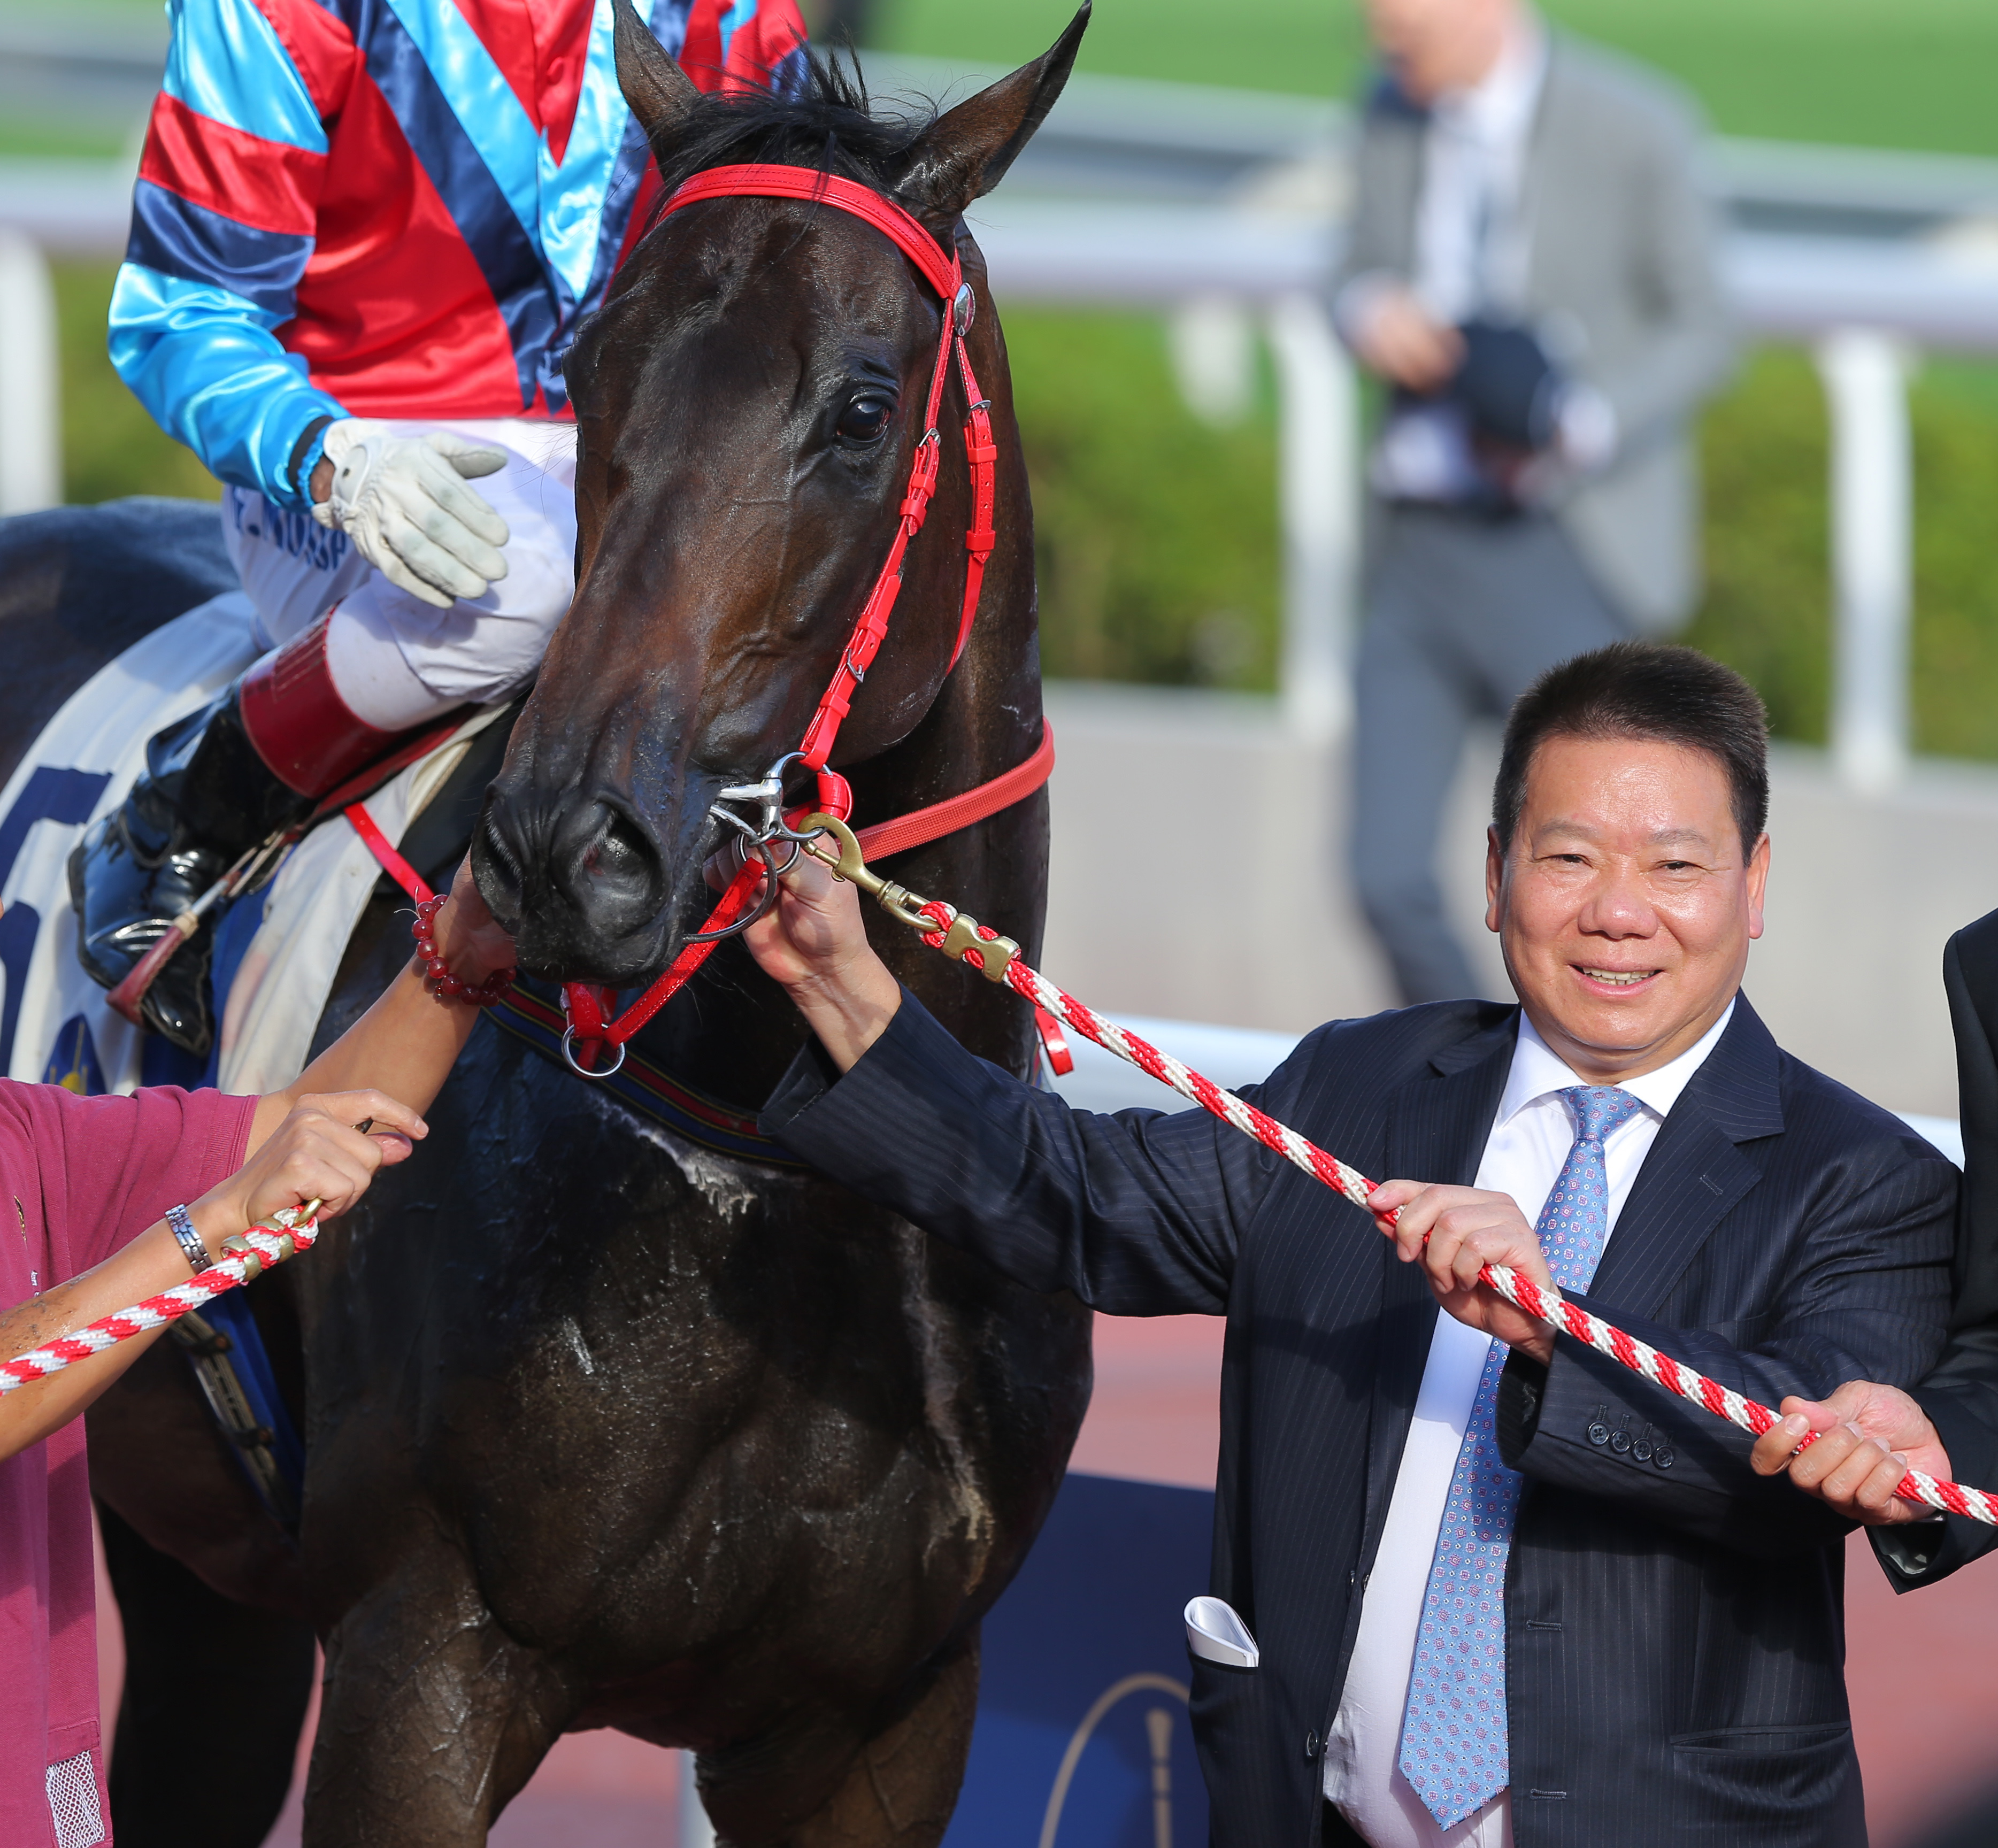 Manfred Man was relieved after Motif finally broke through for his first win. Photo: Kenneth Chan